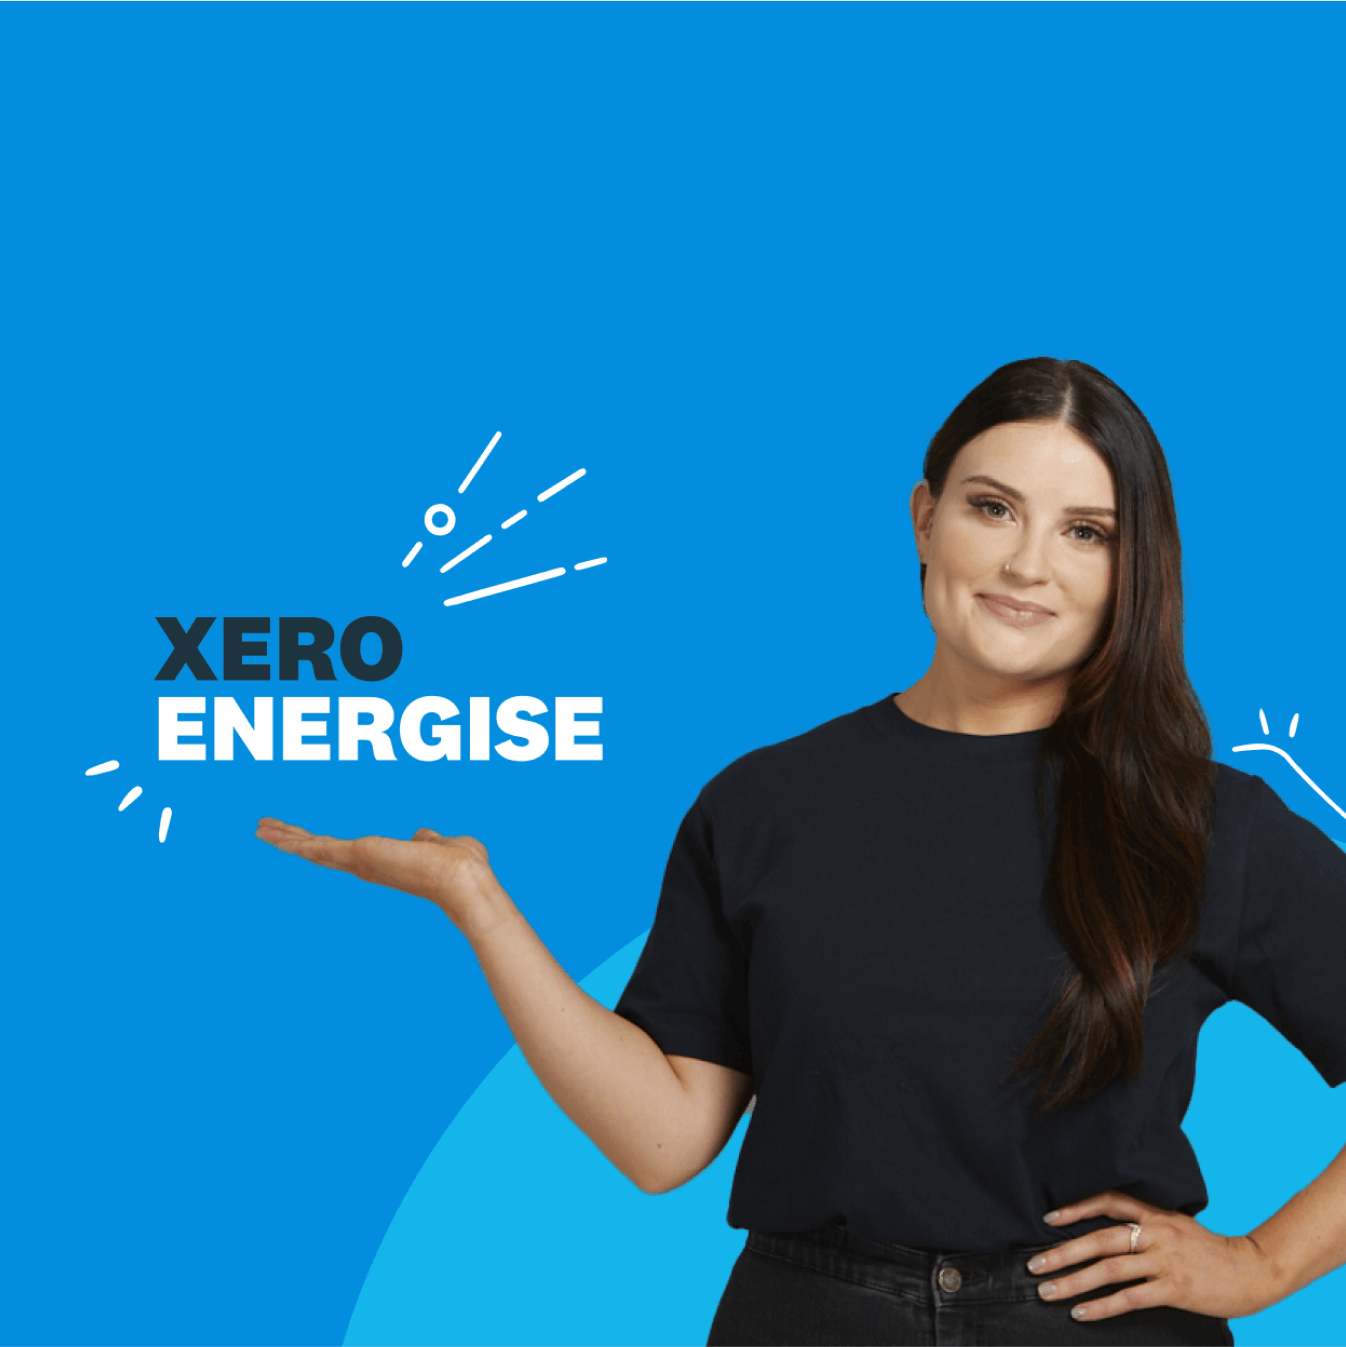 The words ‘Xero energise’ sit above a person’s open palm.